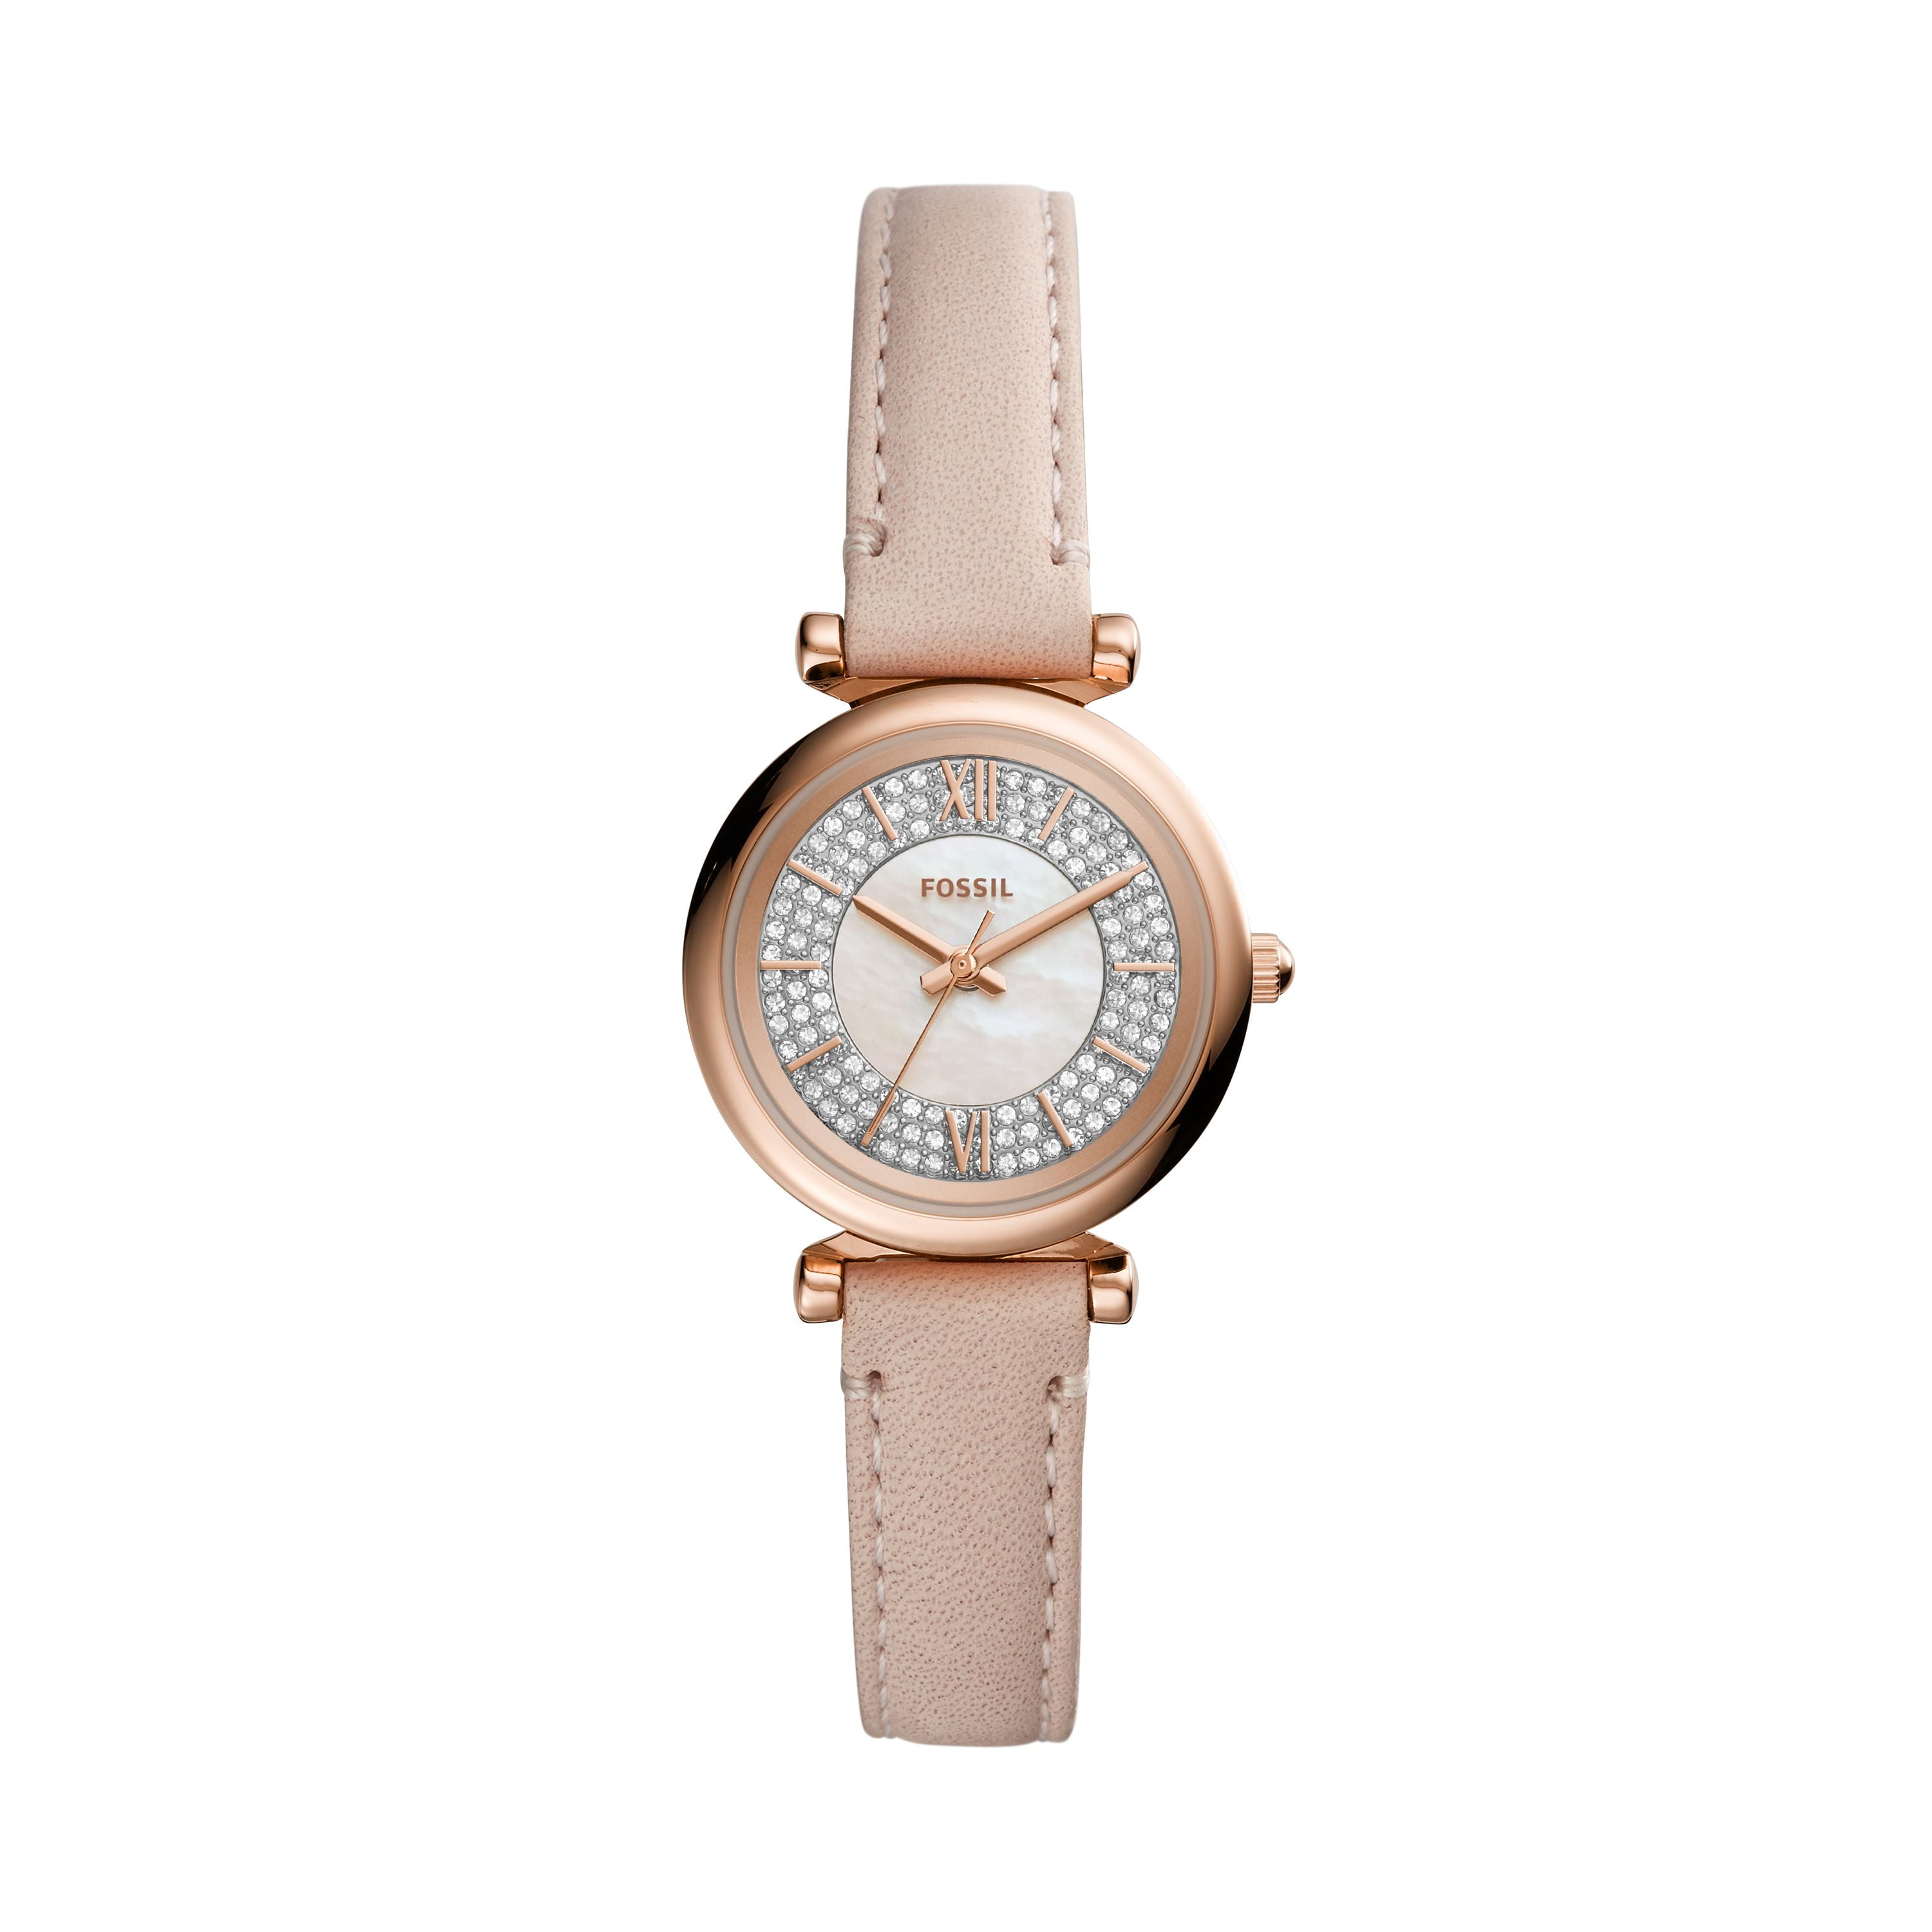 Fossil - Fossil Ladies' Carlie Mini Three-Hand Nude Leather Watch ...